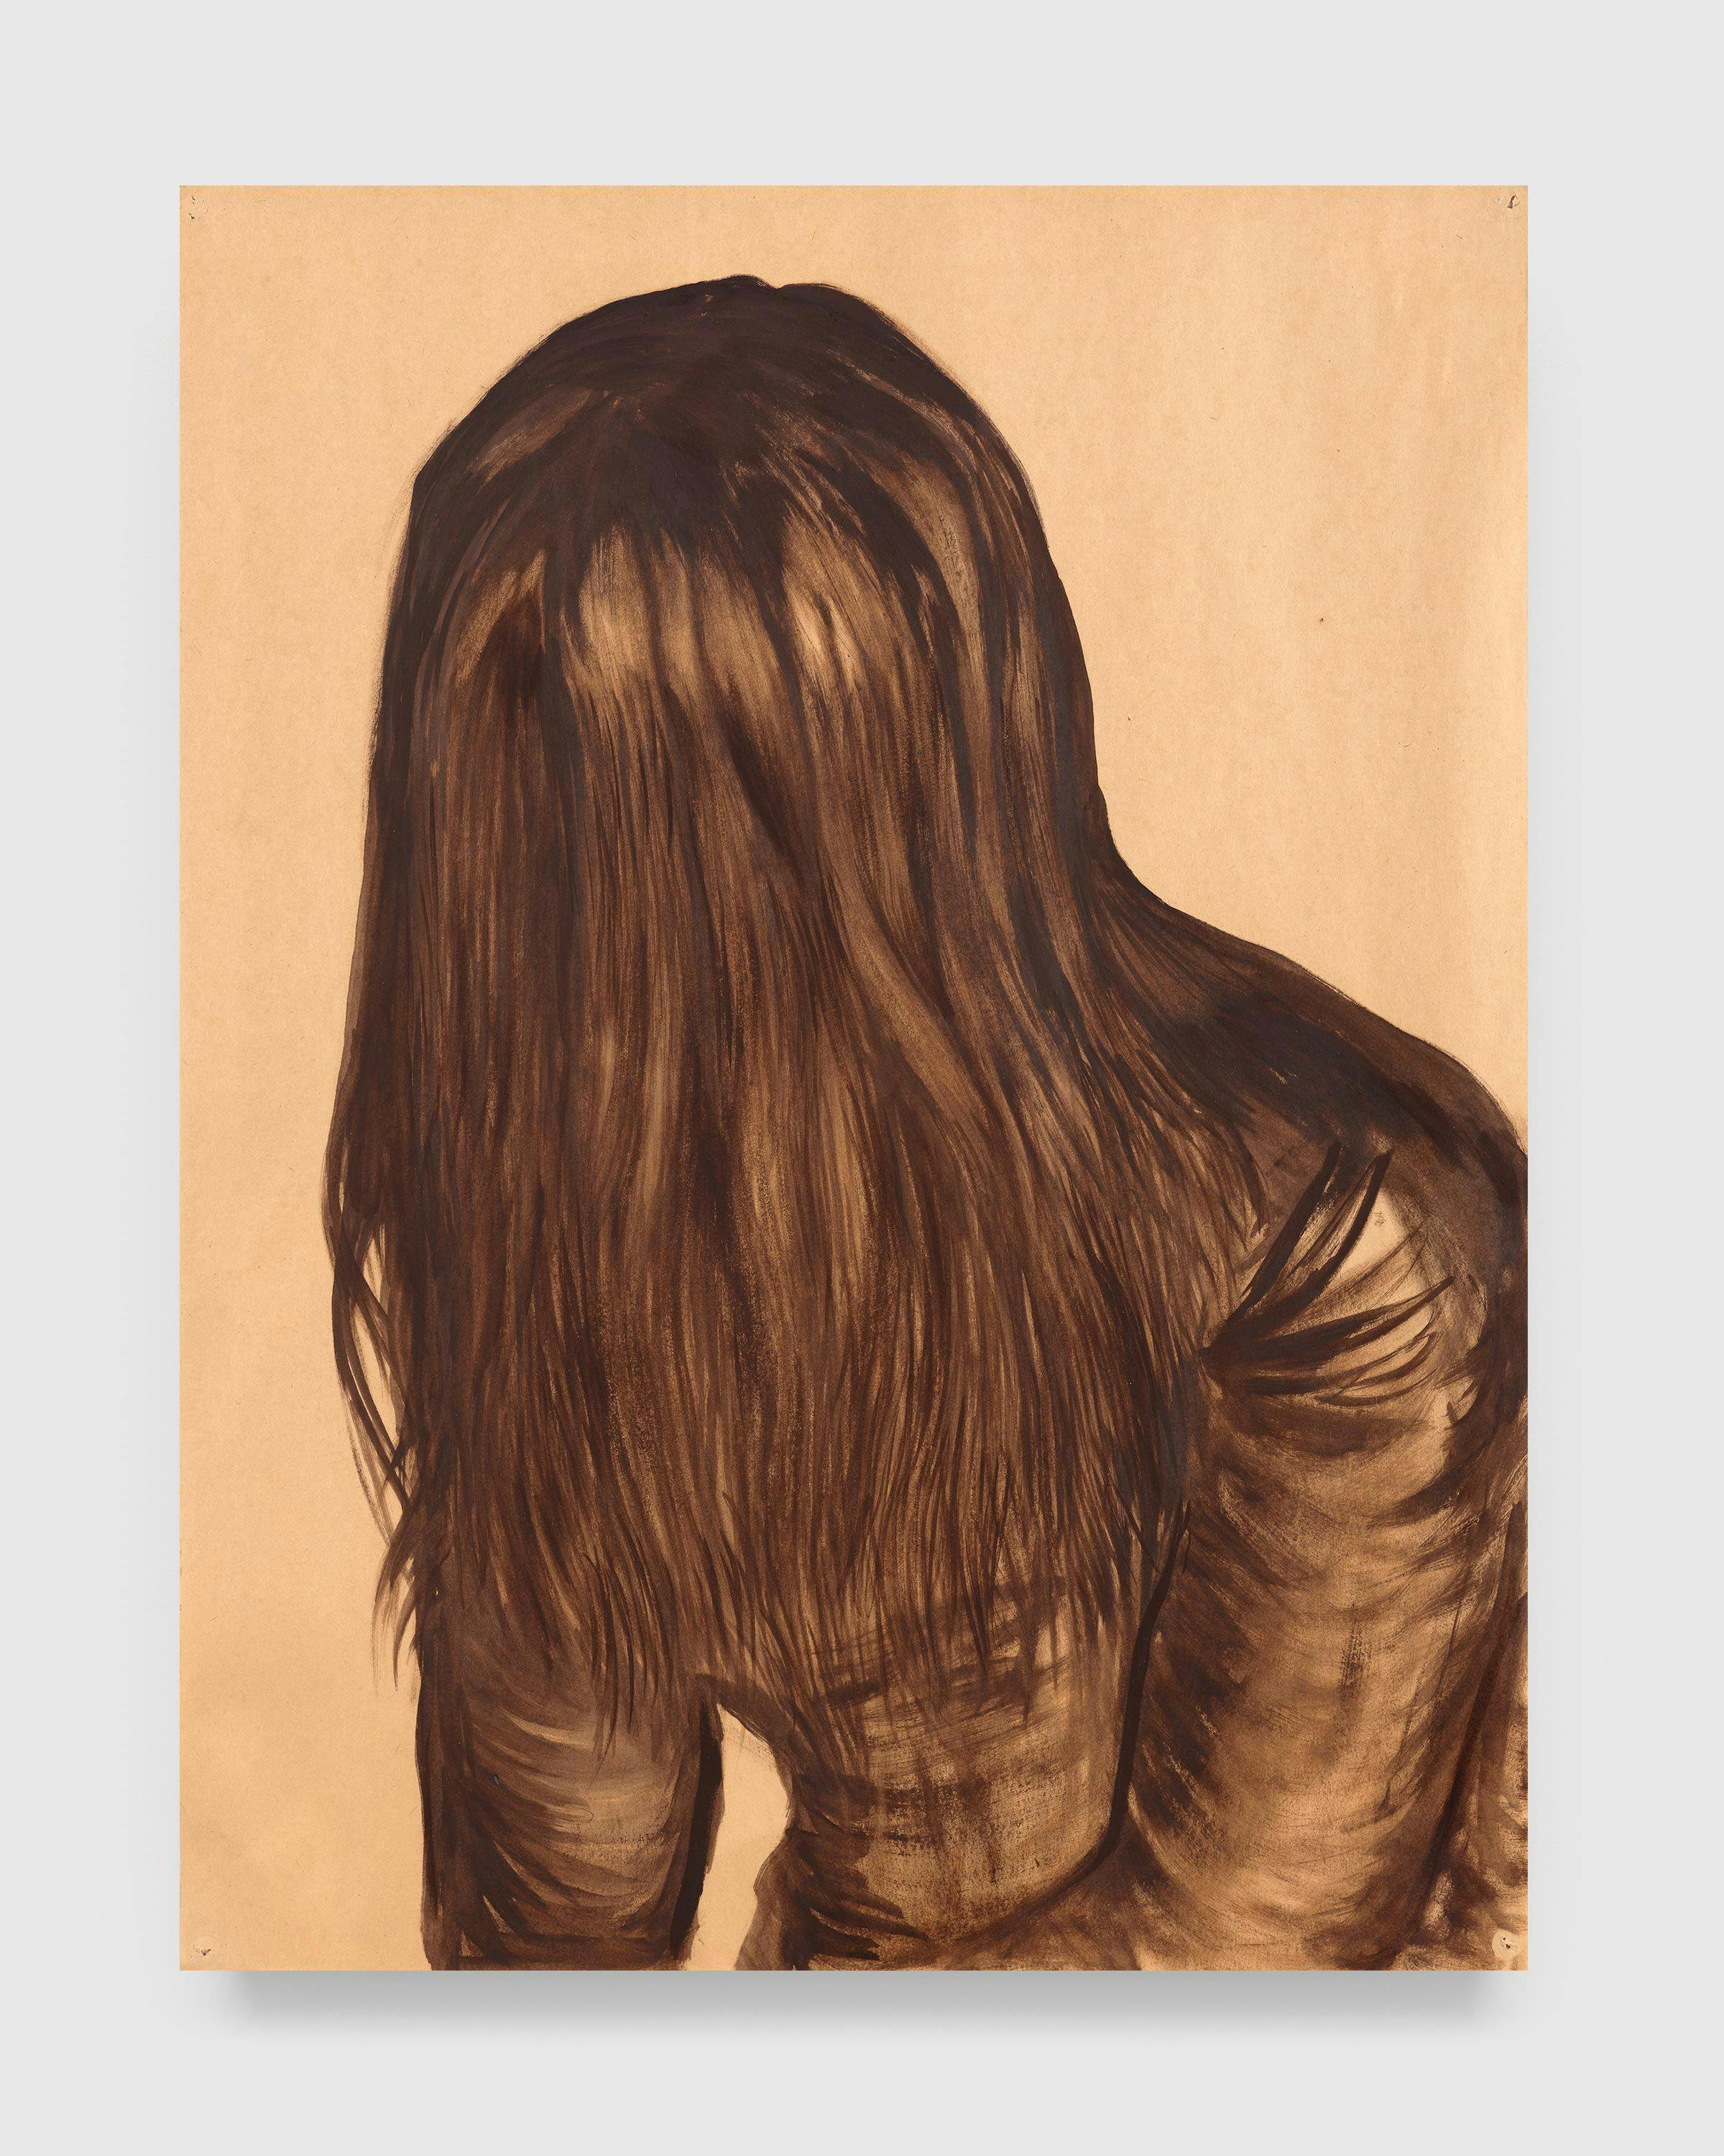 A work on paper by Steven Shearer, titled Longhairs, dated 2004.